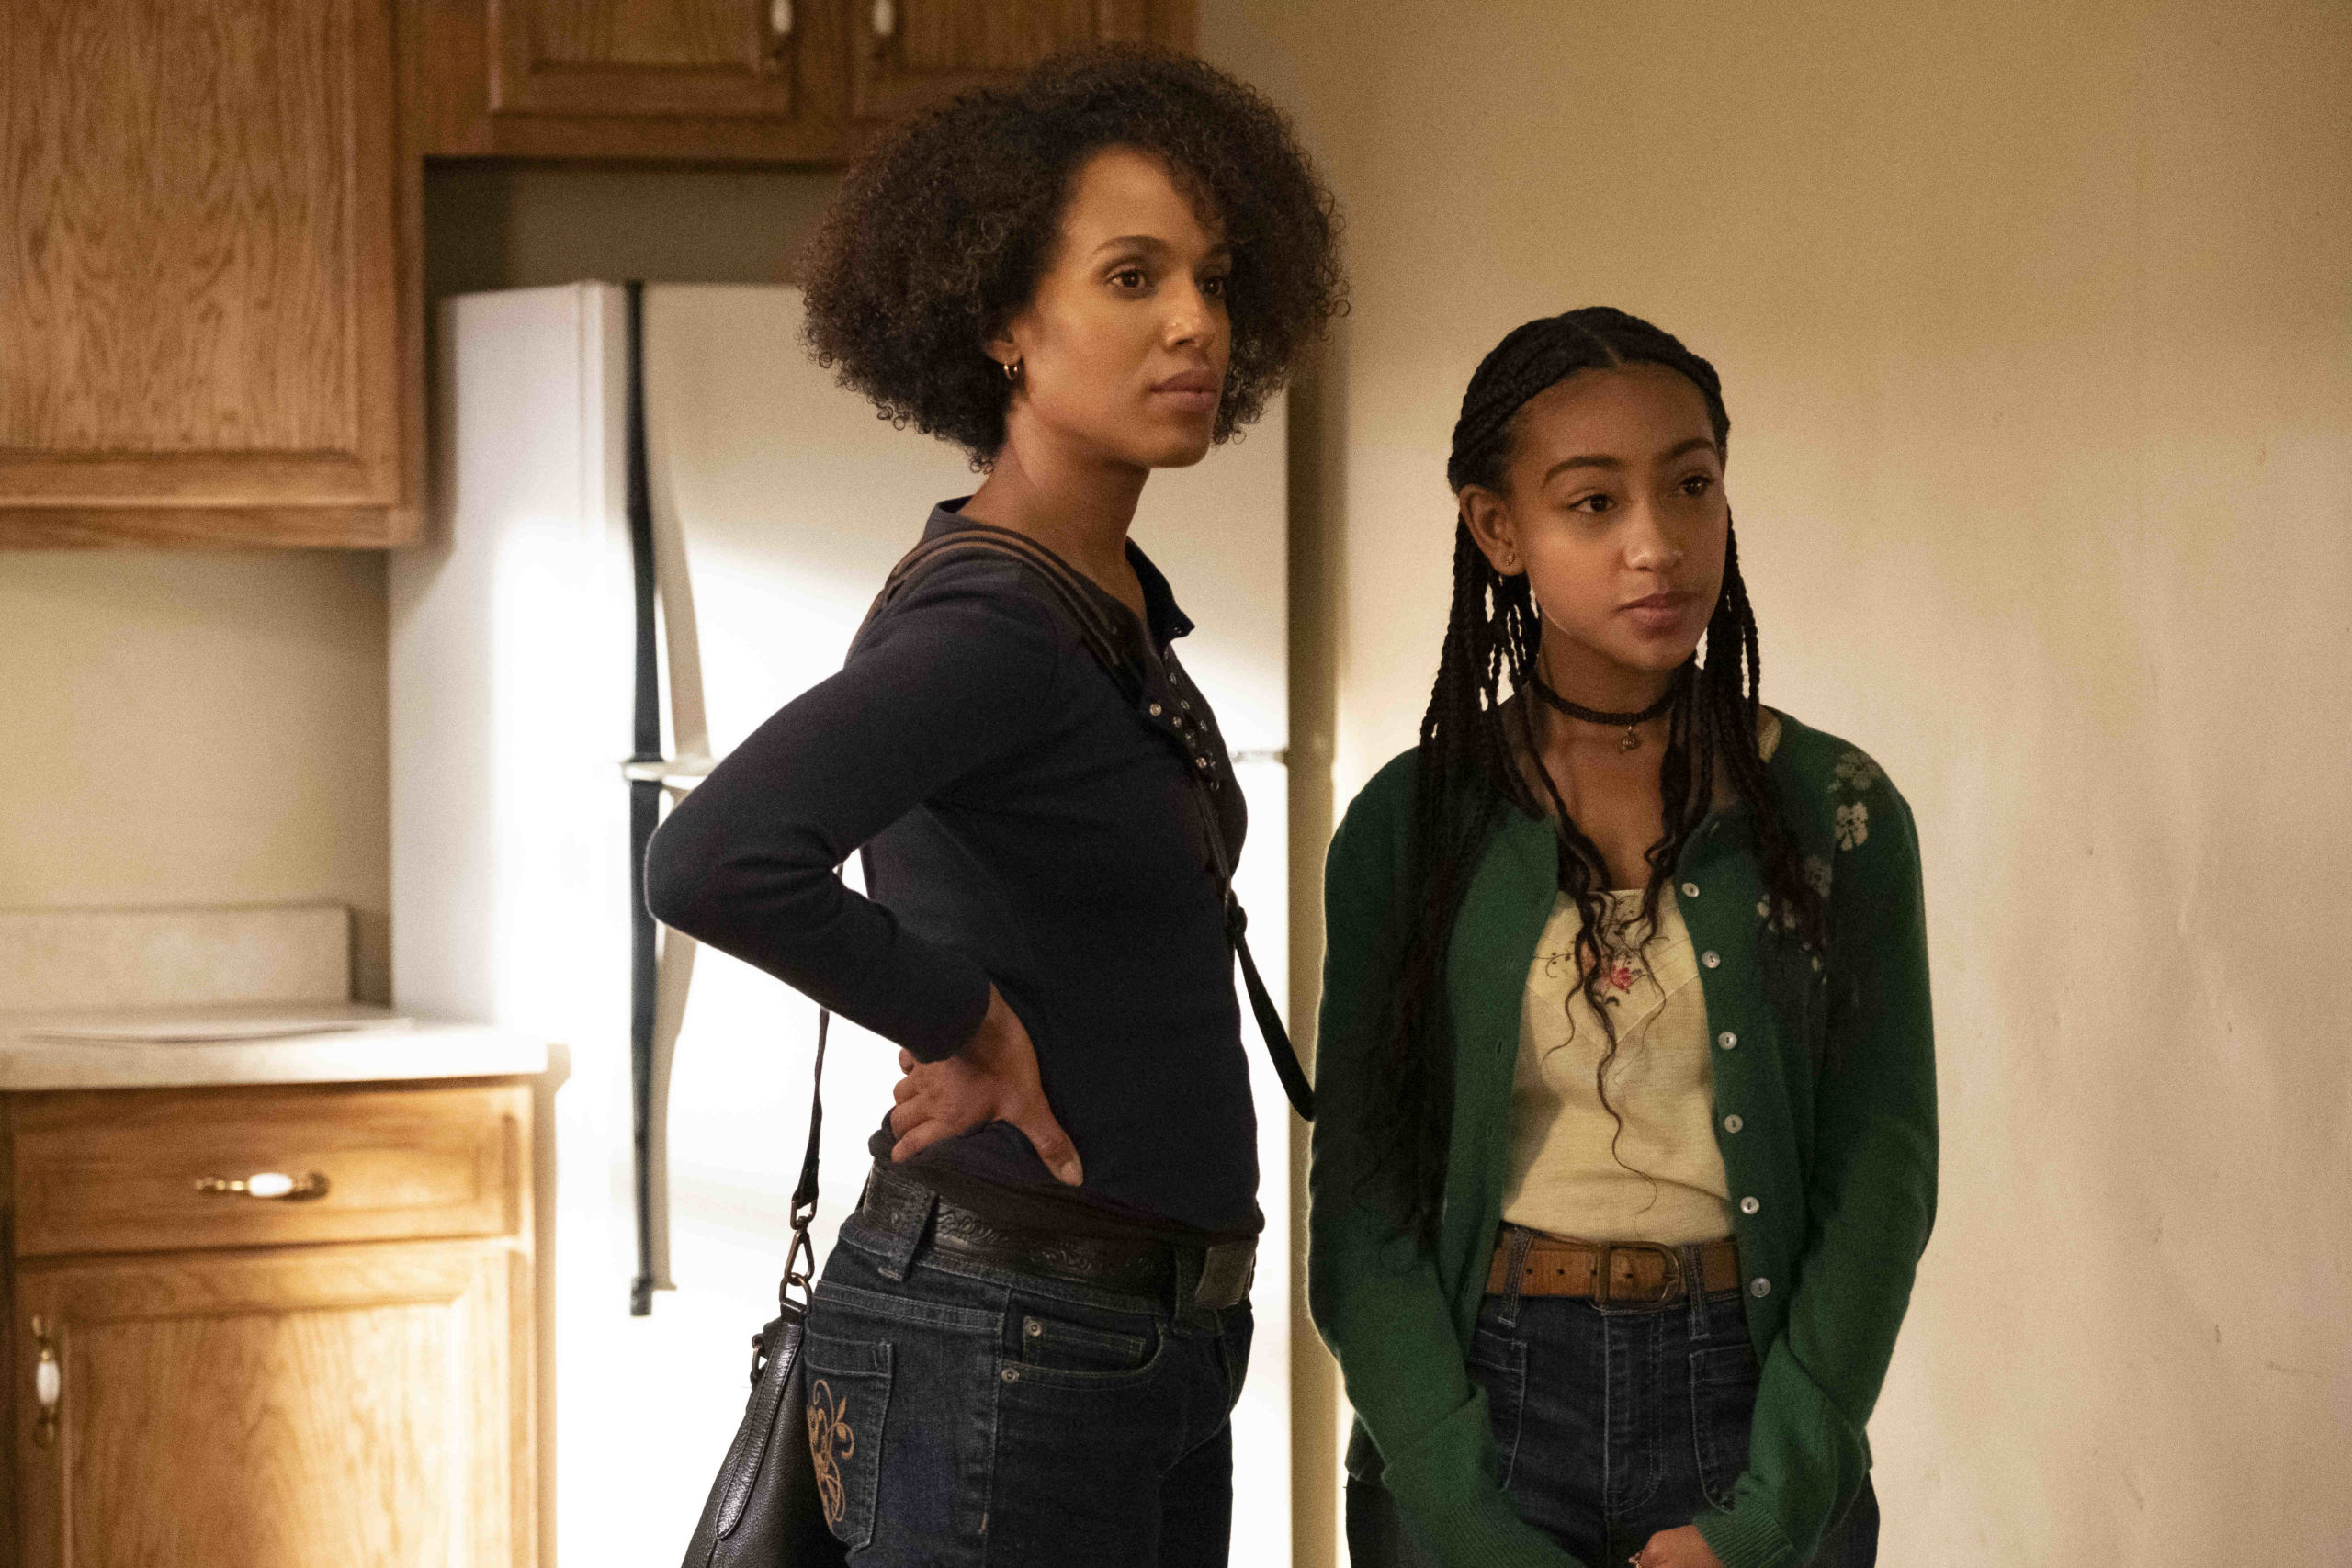 'Little Fires Everywhere' Episode 1: Mia (Kerry Washington) and Pearl (Lexi Underwood) 